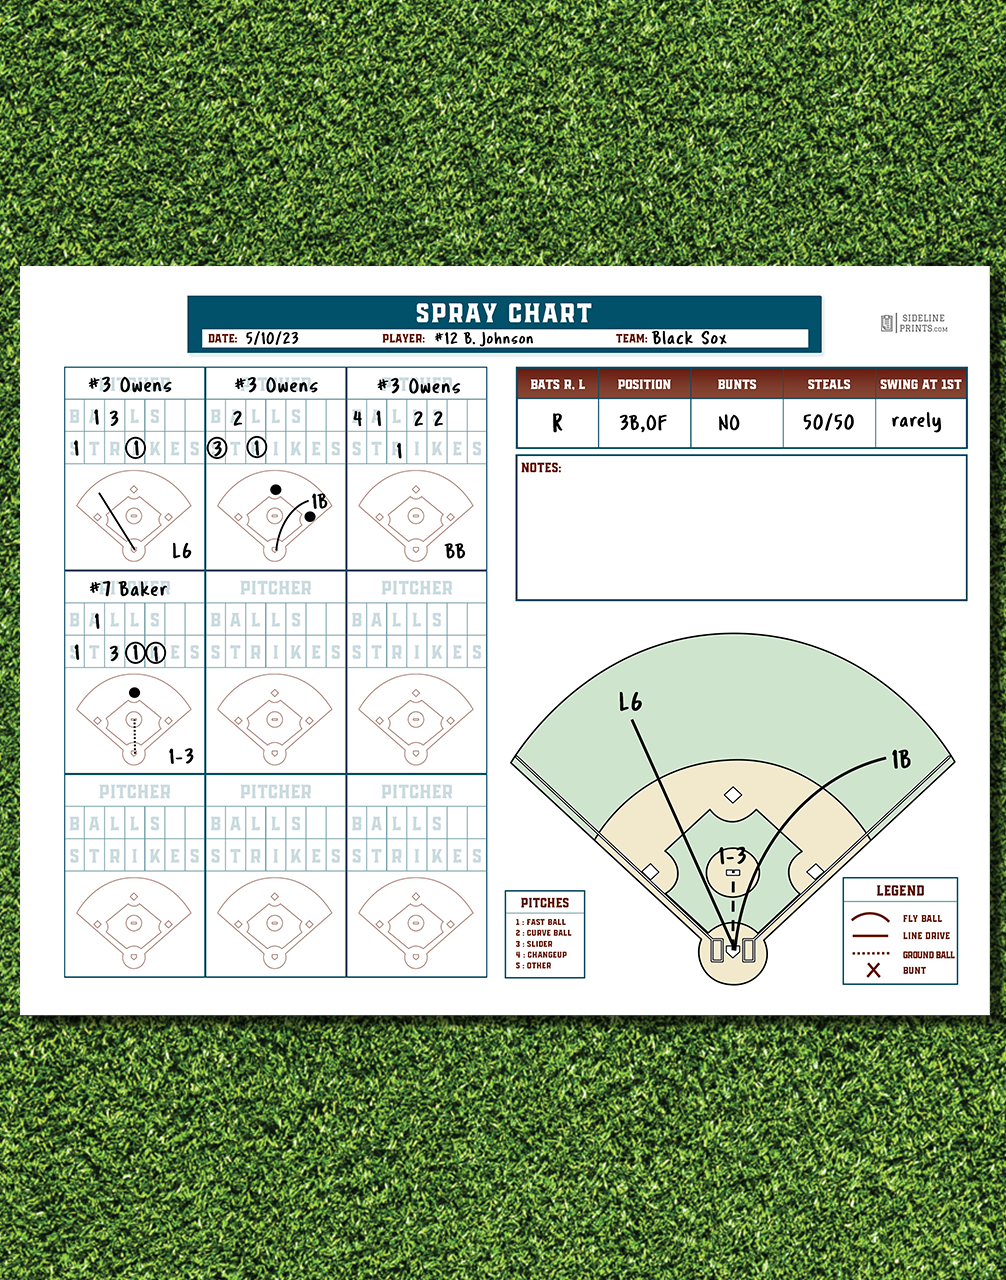 detailed-spray-chart-template-sideline-prints